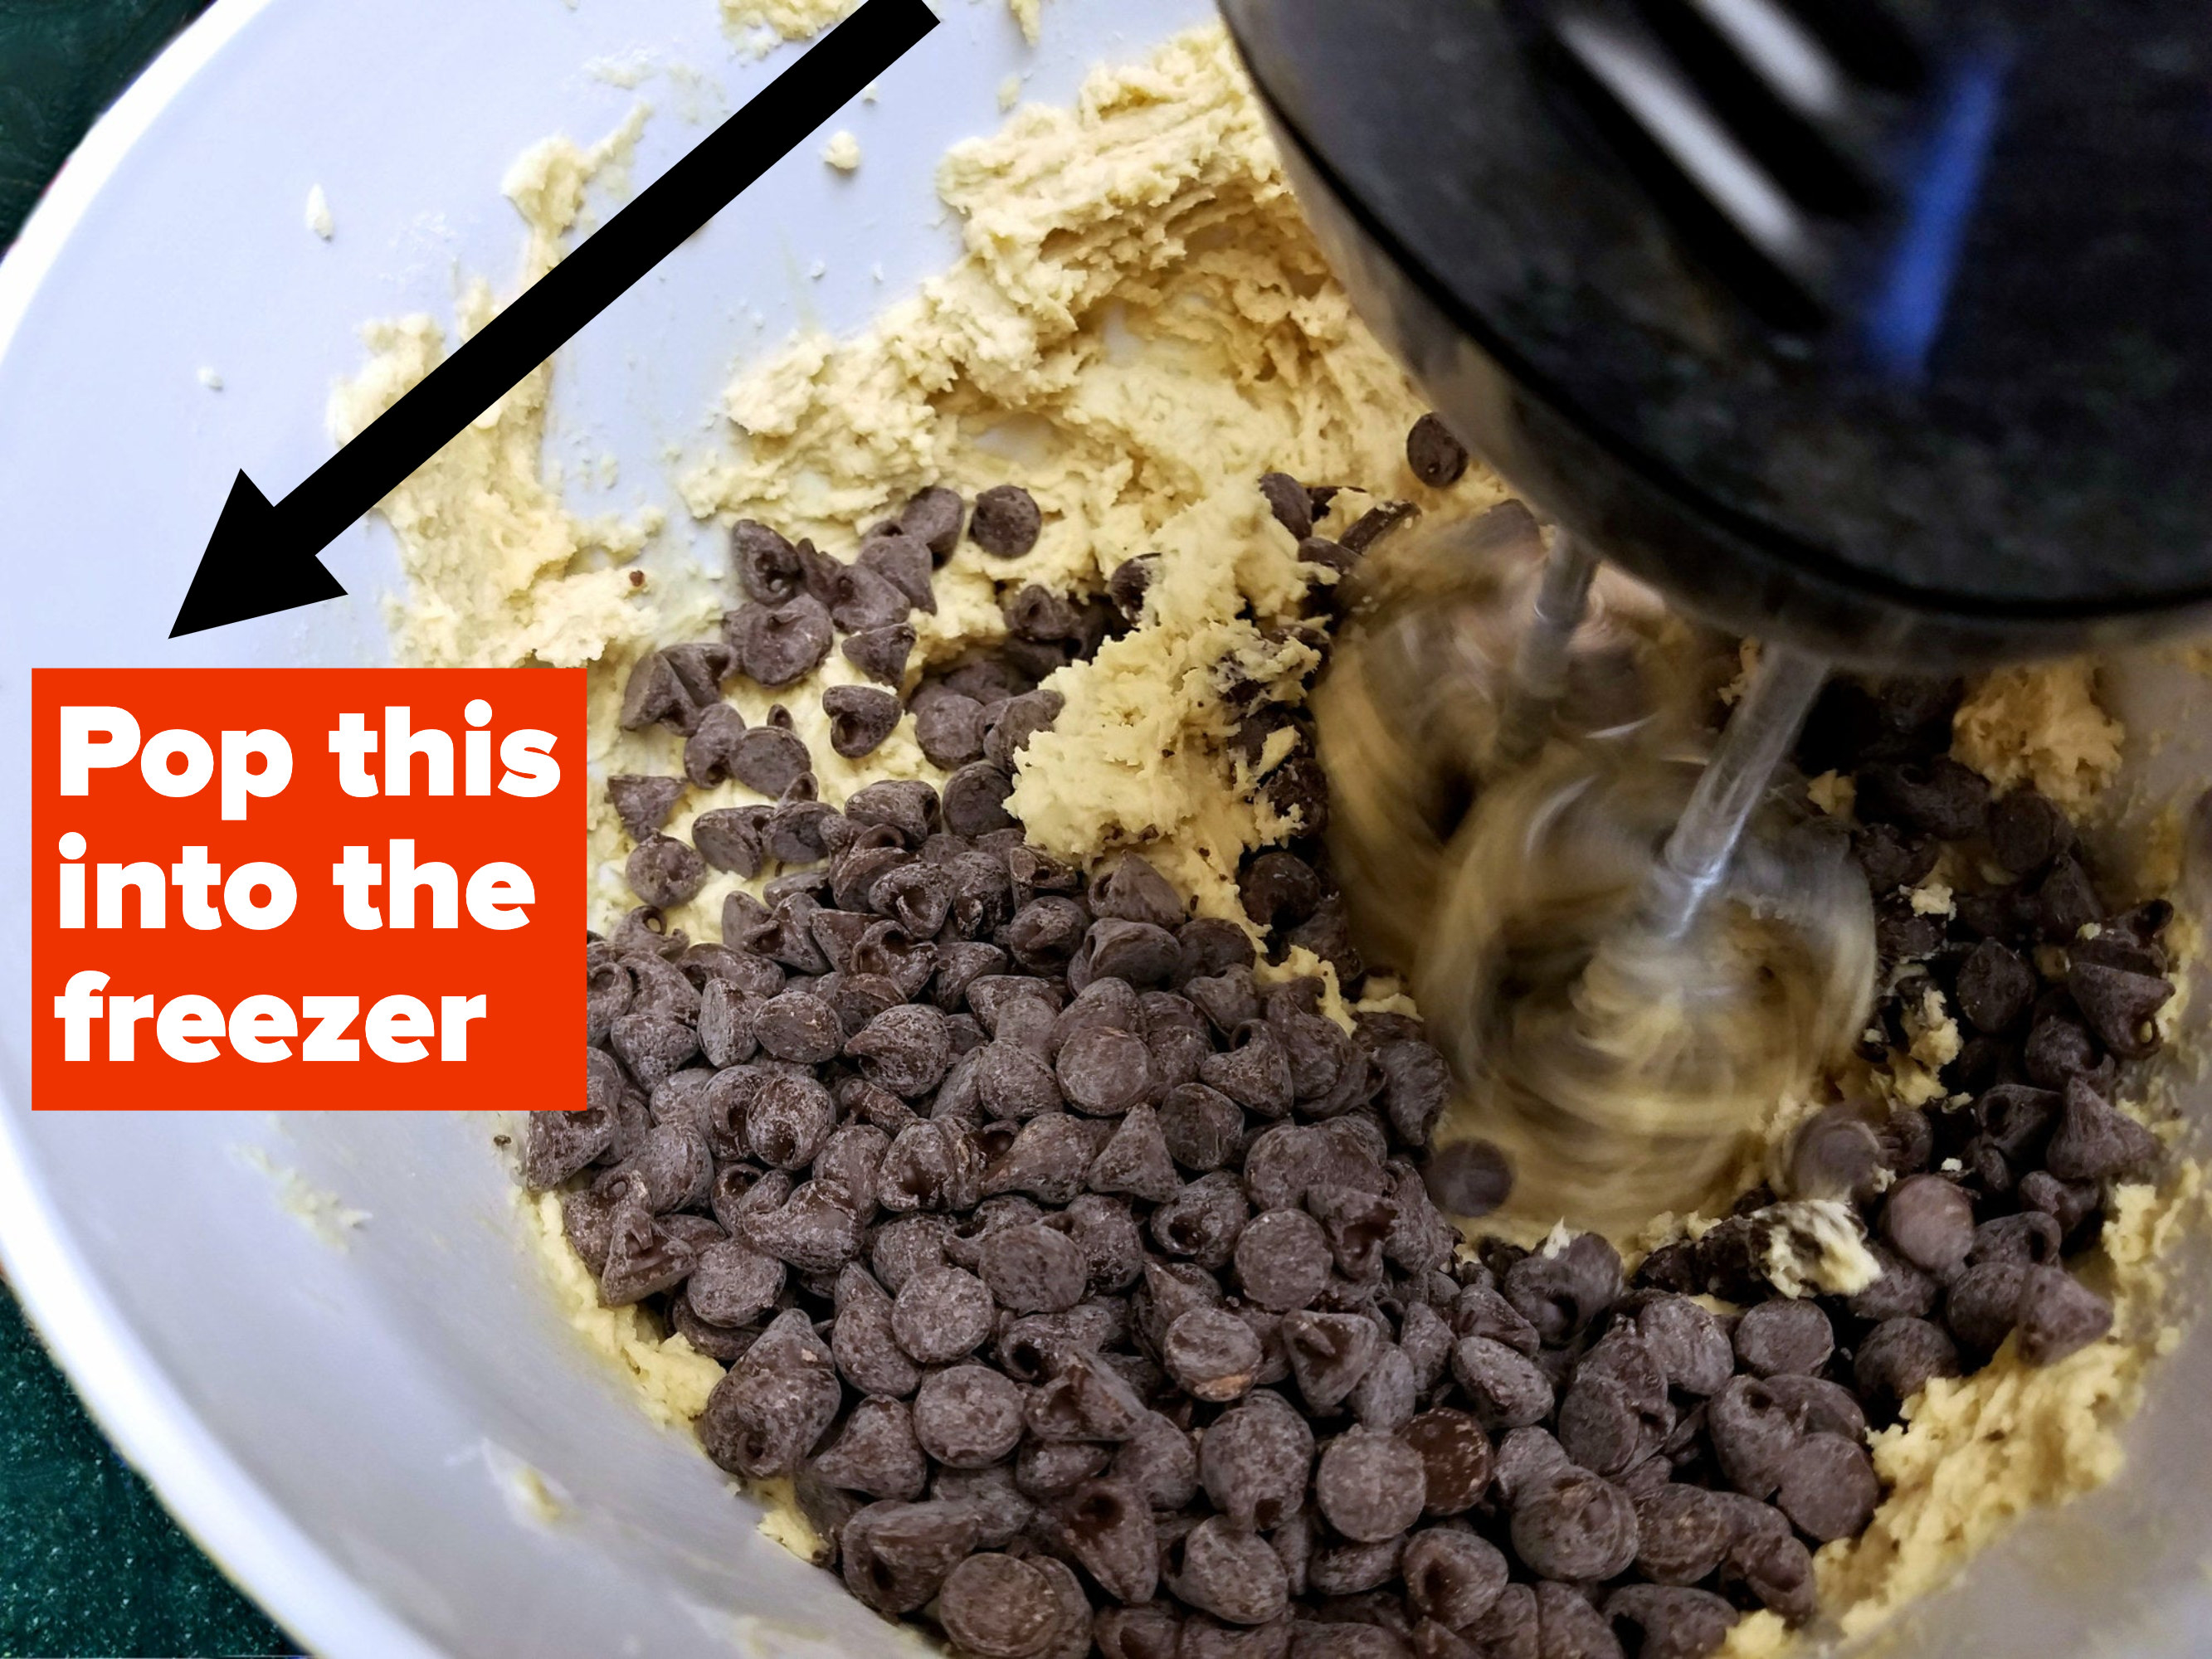 Mixing chocolate chip cookies.